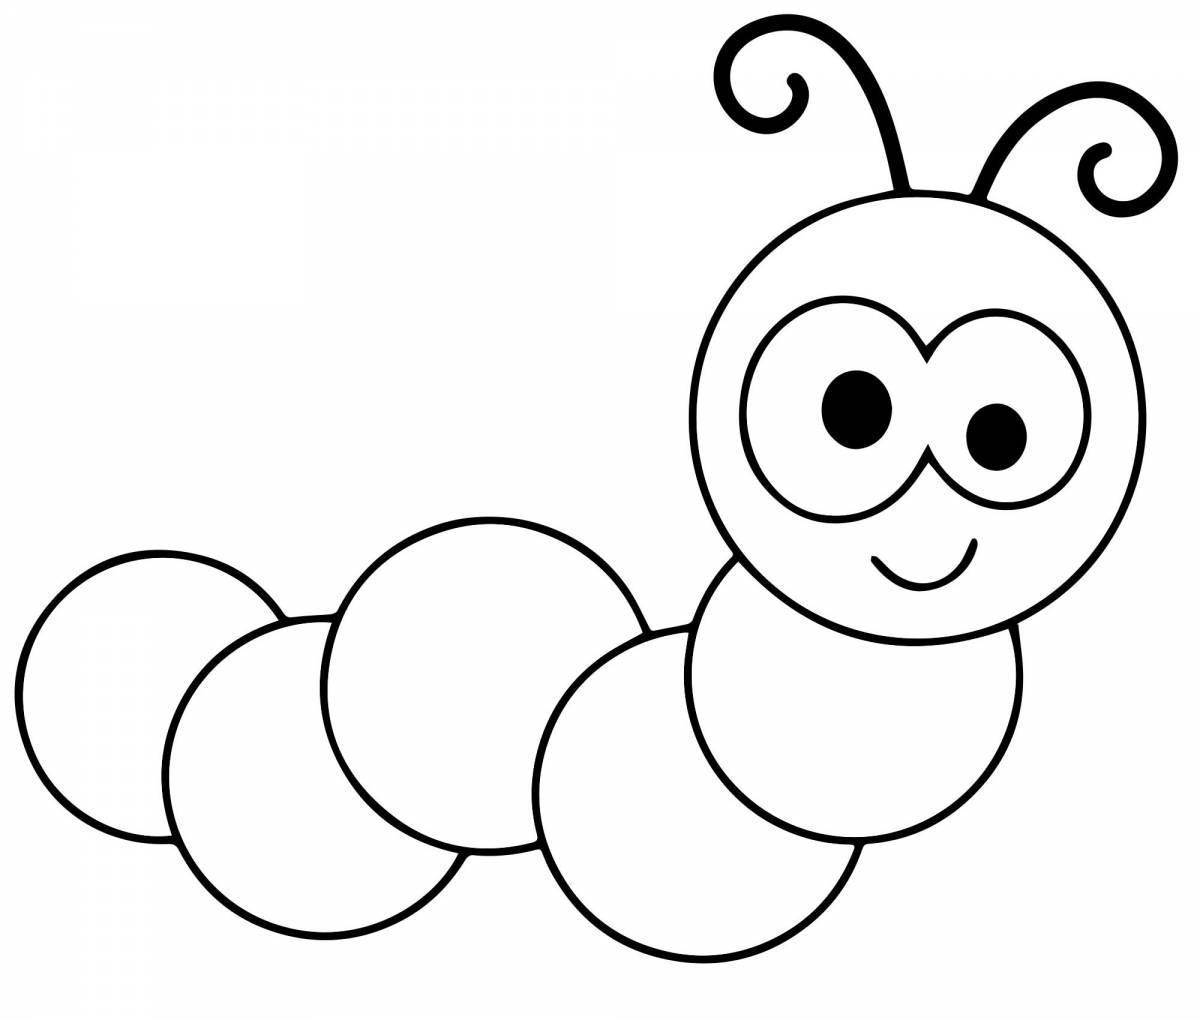 Outstanding caterpillar coloring page for kids